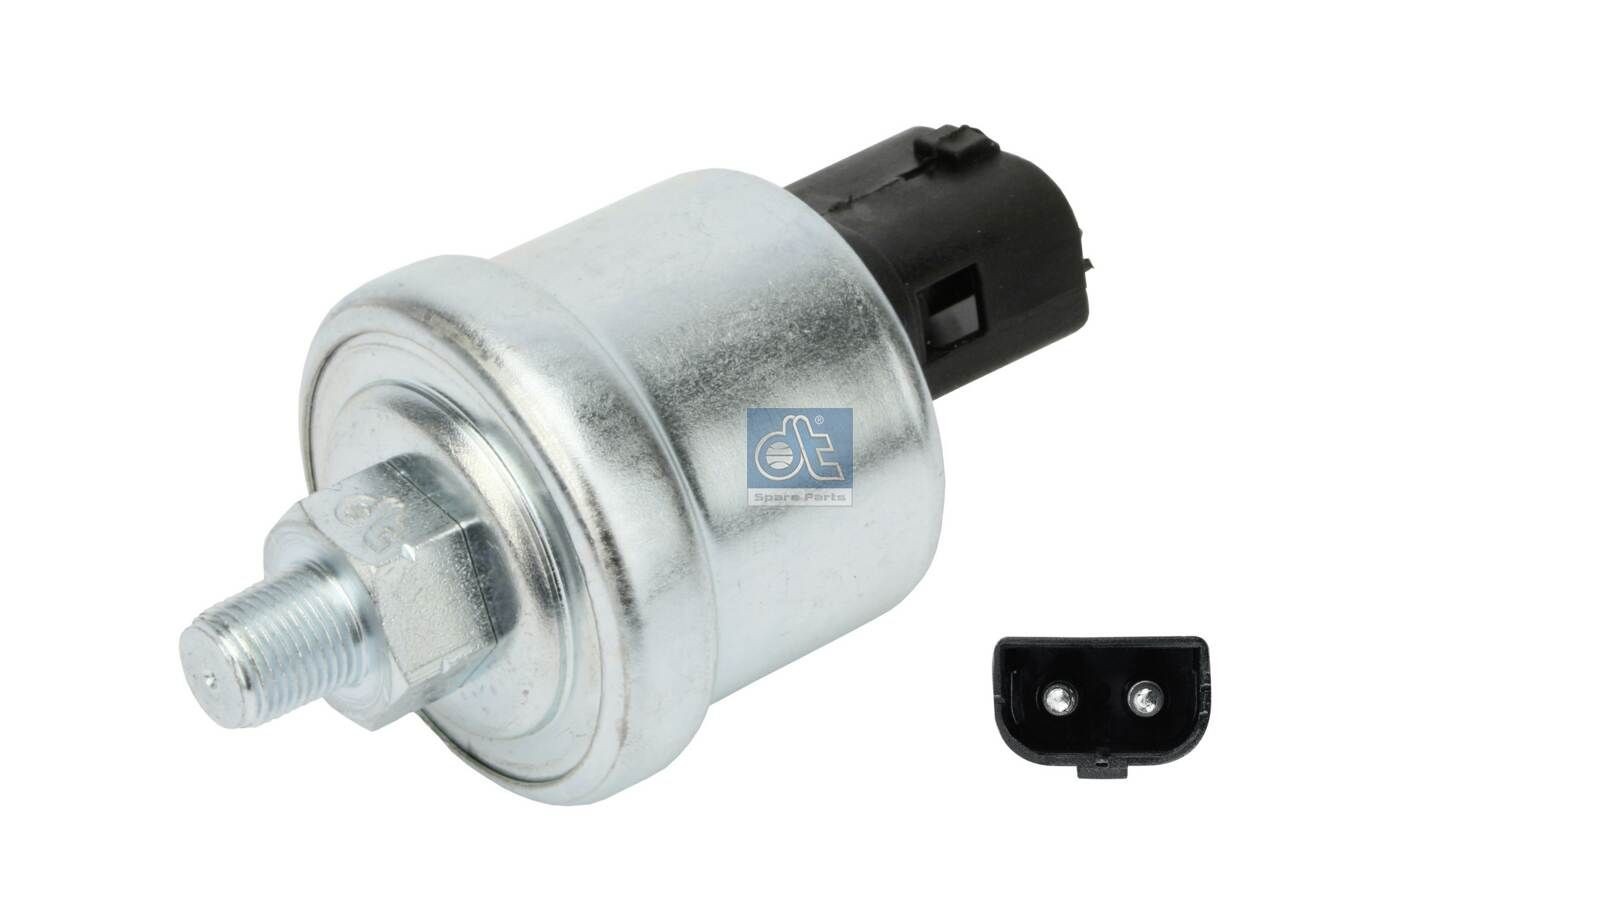 DT Spare Parts 1/8'' x 27 NPTF, 7 bar Oil Pressure Switch 2.23035 buy